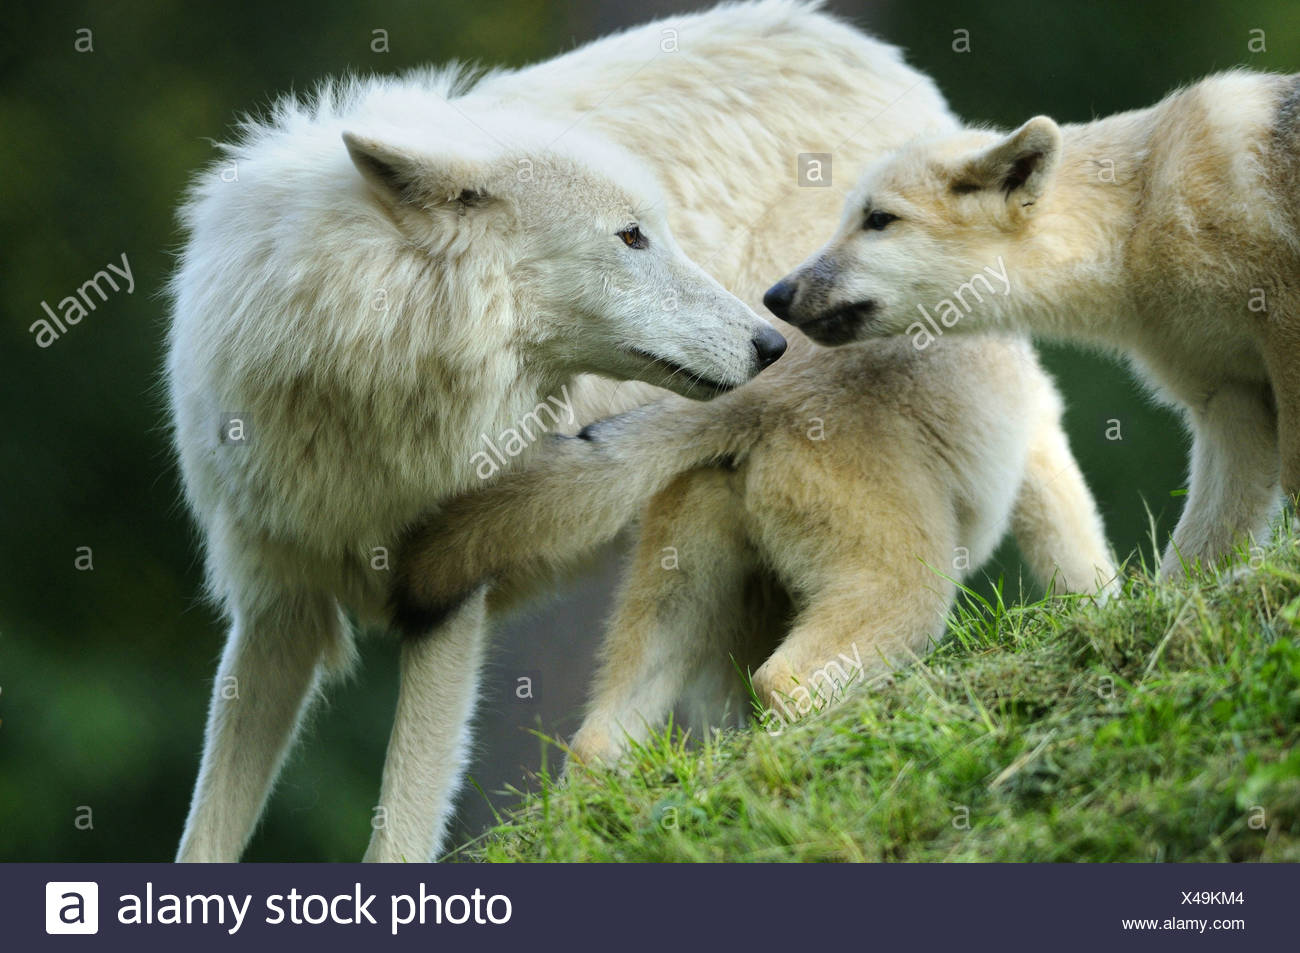 Wolf Sniffing High Resolution Stock Photography and Images - Alamy